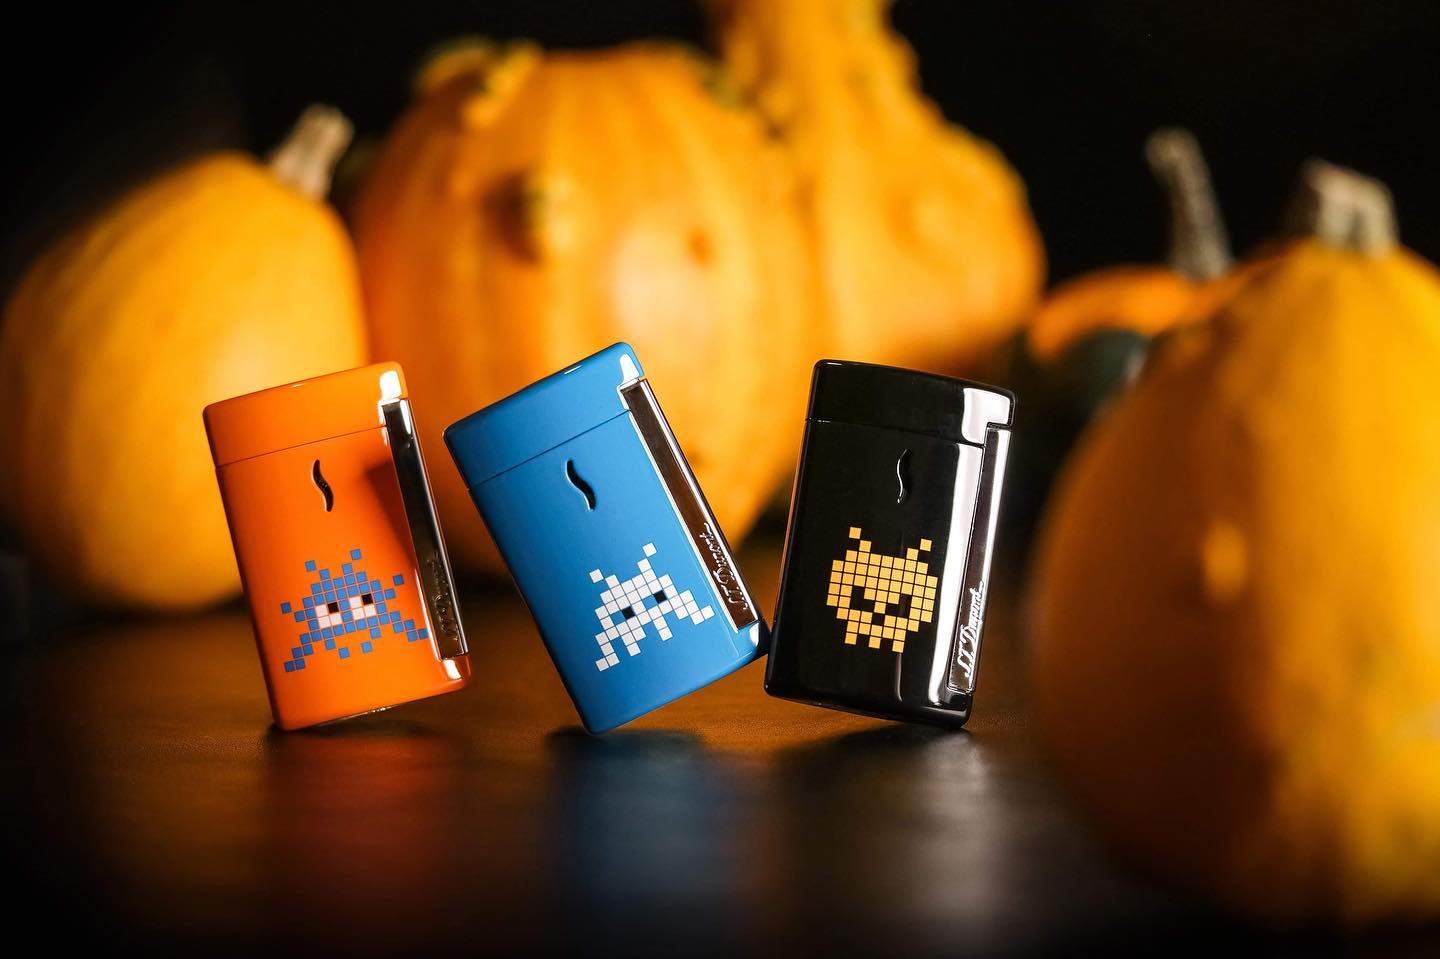 BEWARE OF THE SPACE INVADERS INVADING DURING HALLOWEEN! Just as the millennial generation has its own unique character, the Minijet lighter has the strength of personnality to keep them entertained . Power every day, fun forever, exceptional as always!